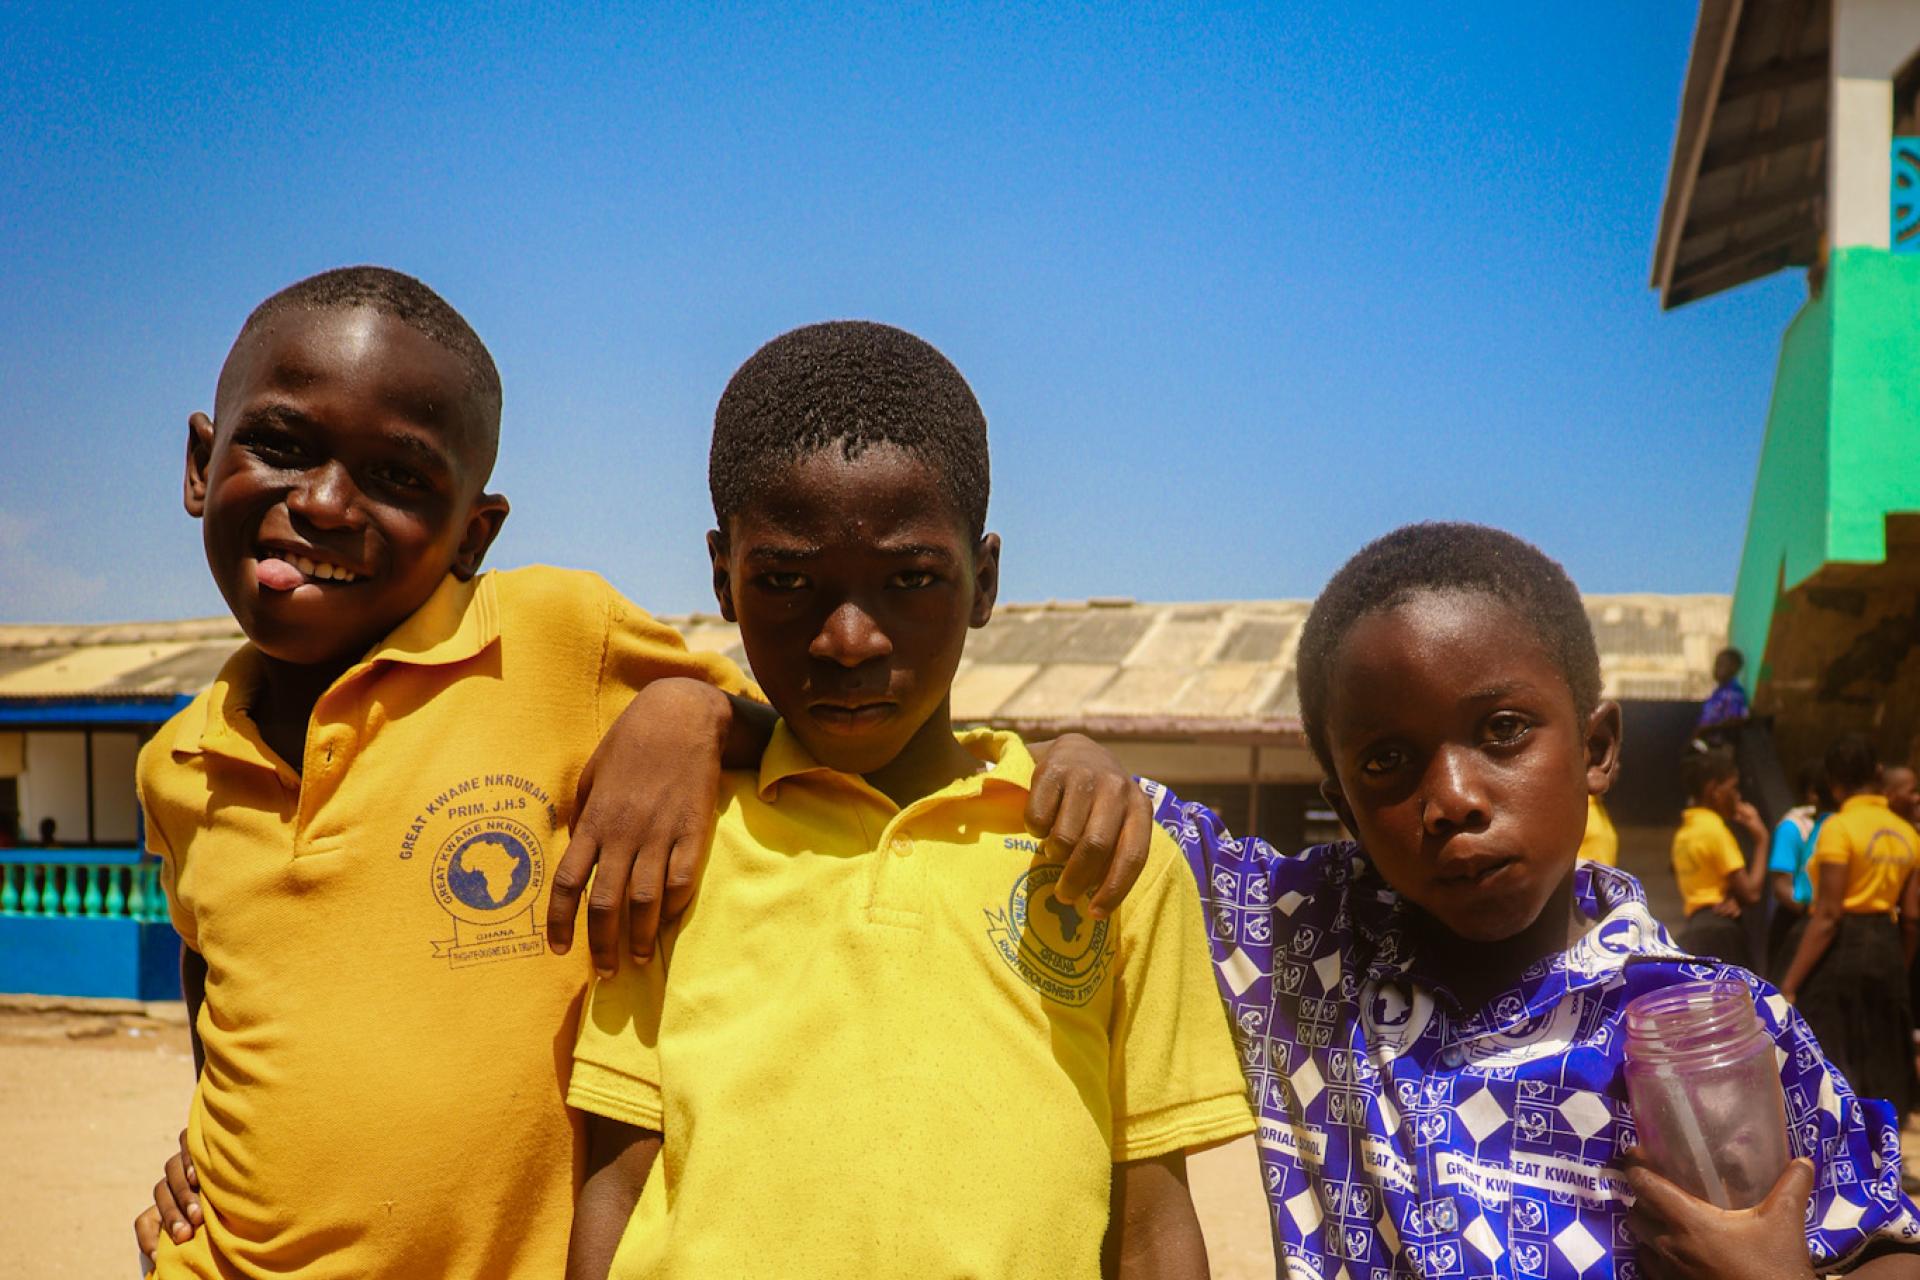 Three students of Kwame Nkrumah Memorial School eagerly pose together